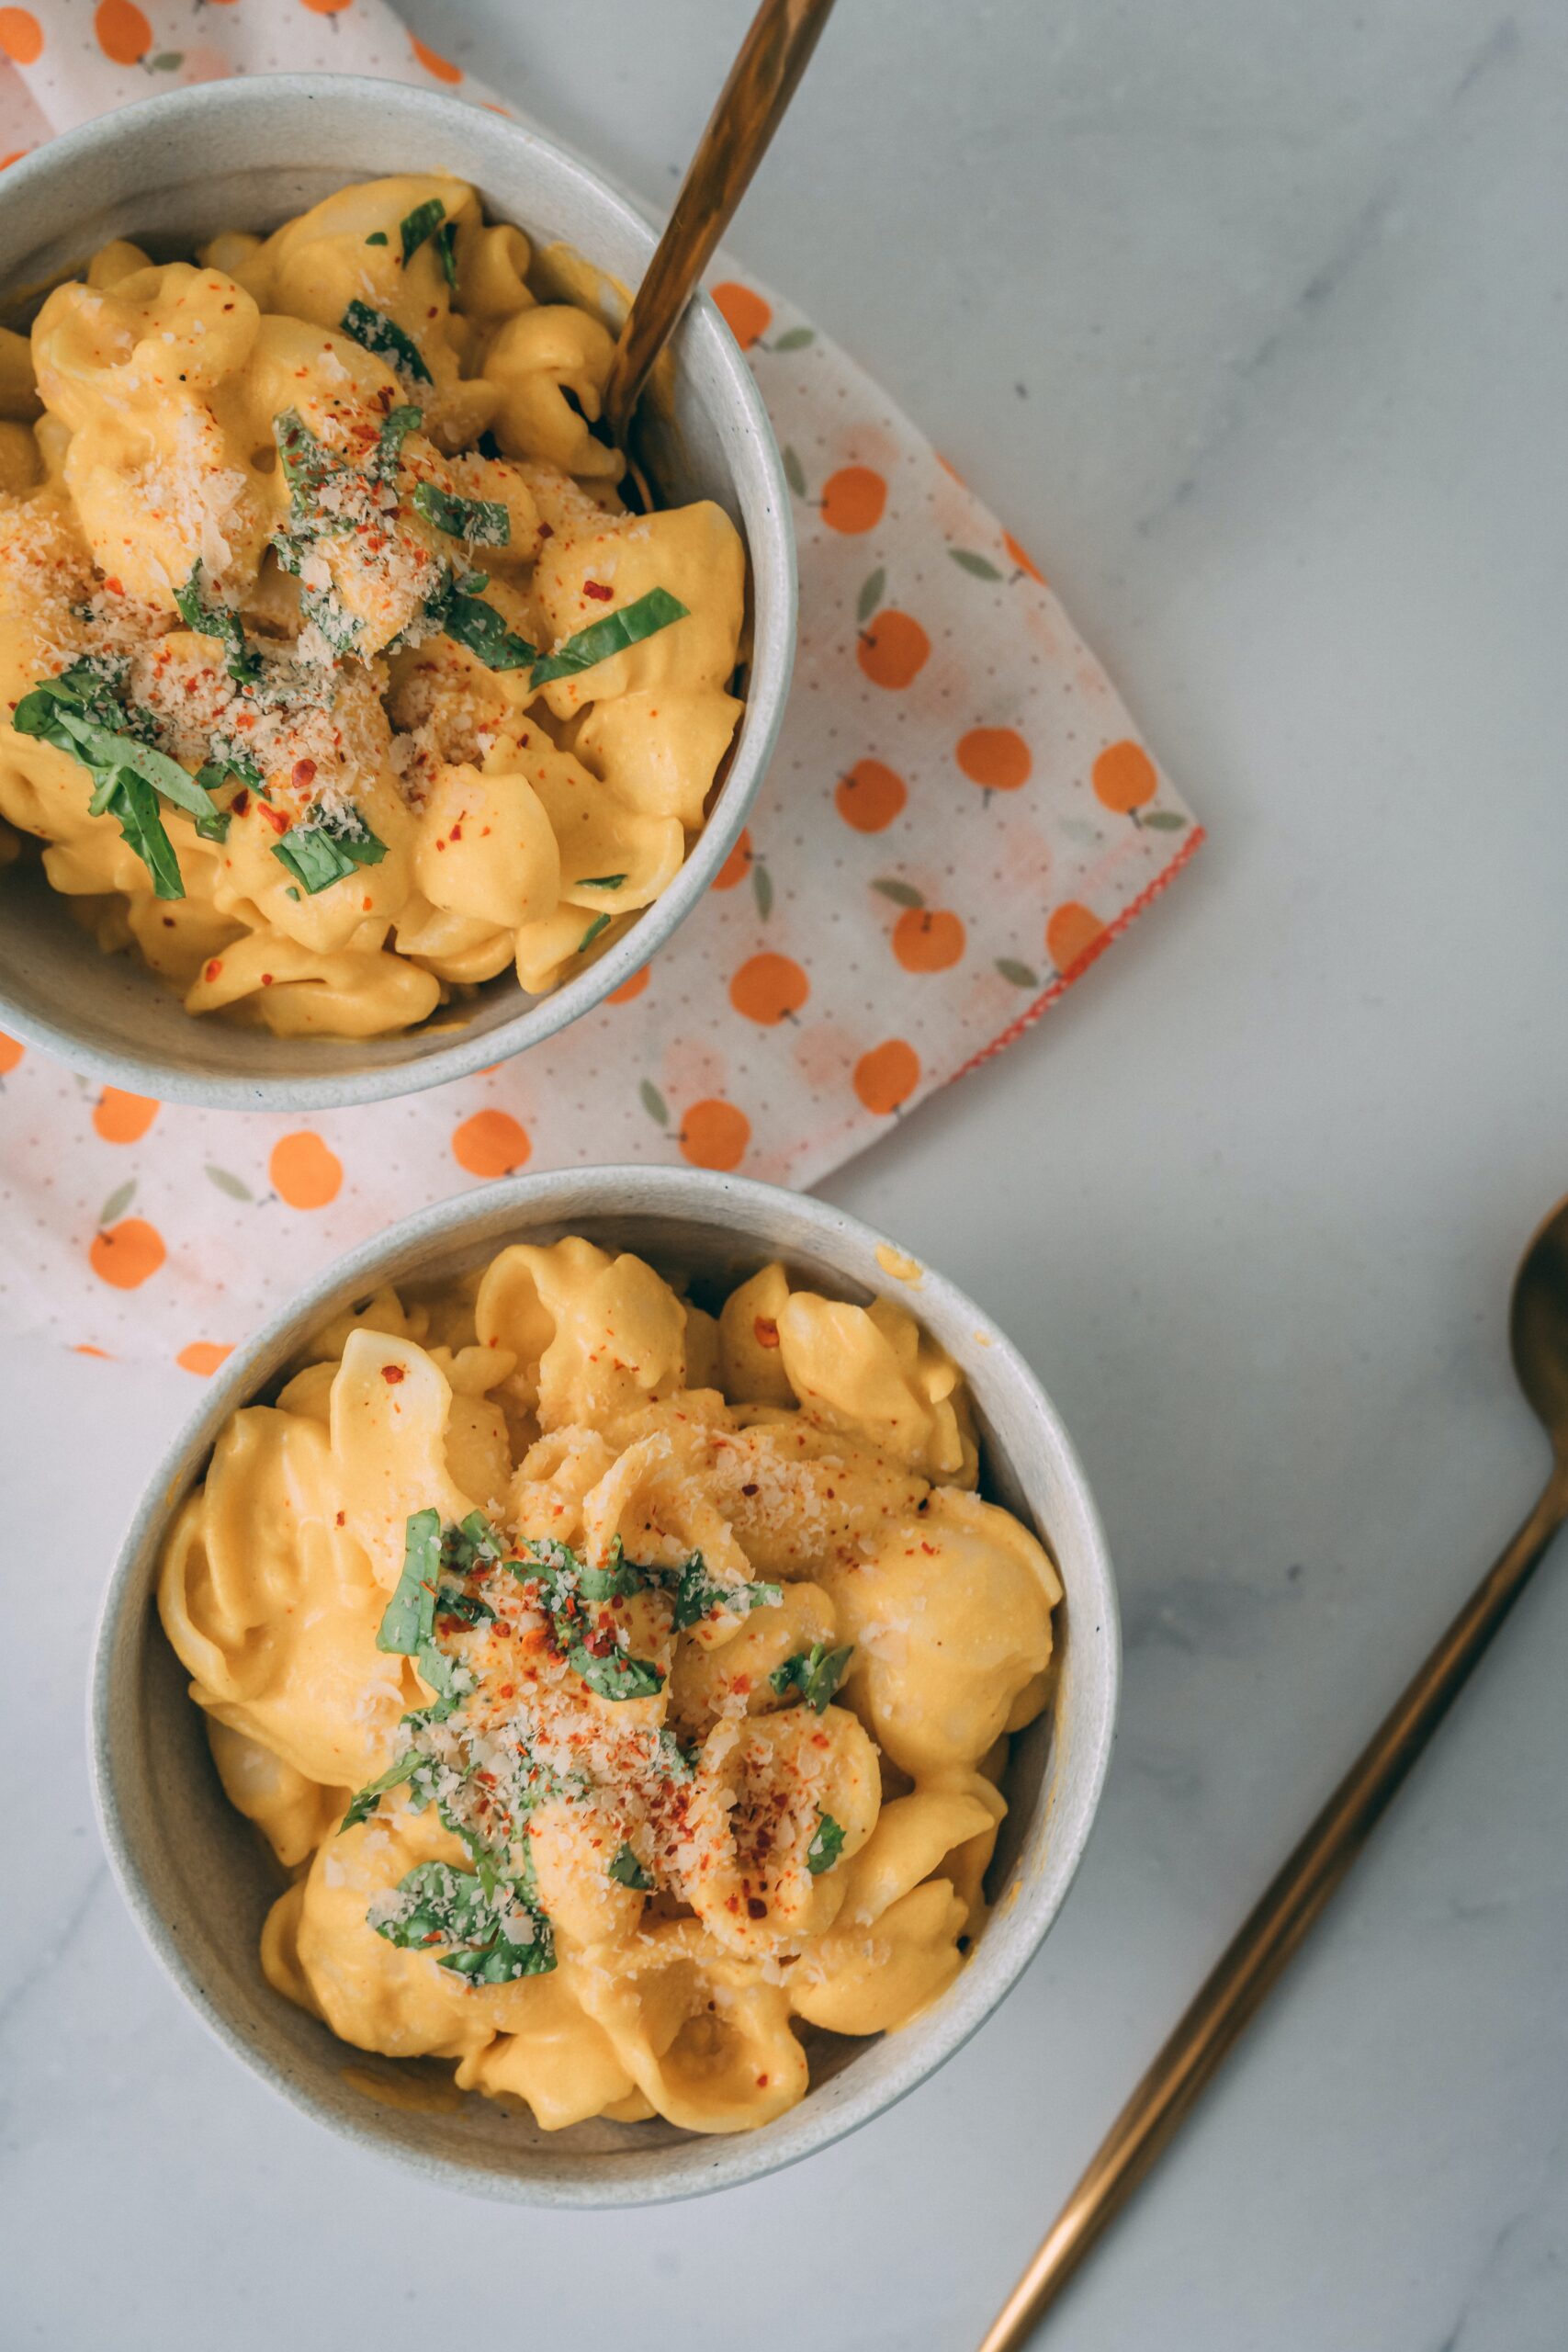 How to Reheat Mac and Cheese in Microwave - Microwave Meal Prep